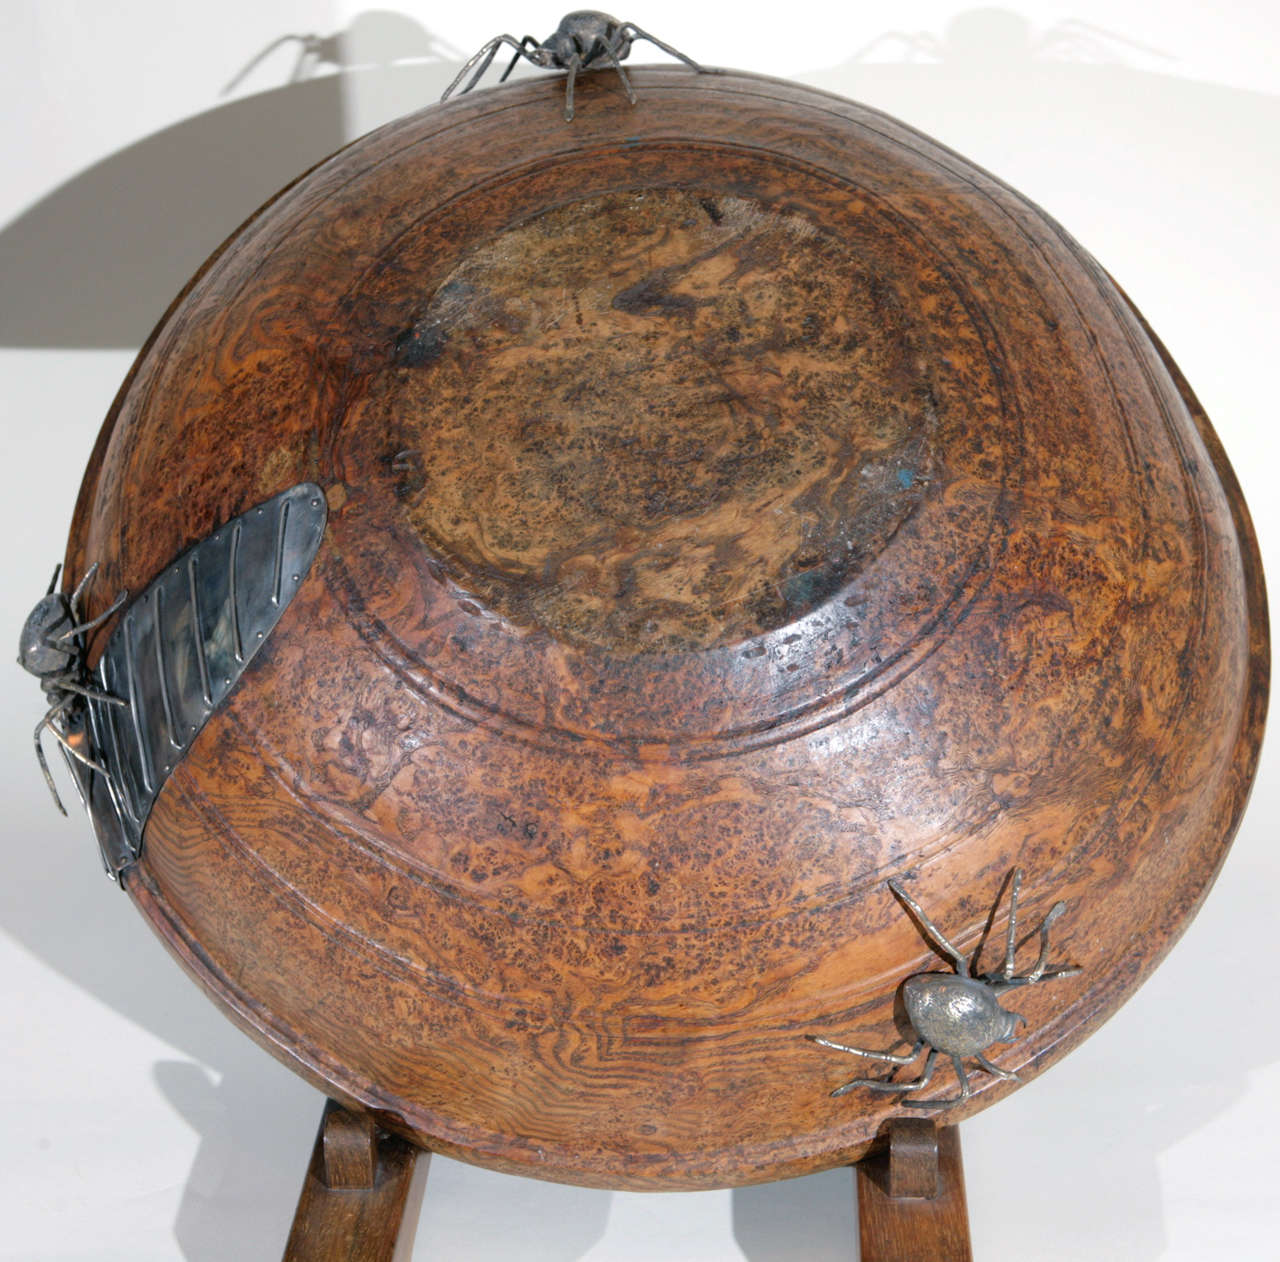 THIS HUGE ONE-OF-A-KIND BURL WOOD BOWL WAS CREATED IN the late 19th CENTURY.  AN ARTISAN CREATED AND APPLIED THE LARGE silvered BRONZE SPIDERS AT A LATER DATE. ITS JUST AMAZING!!! ITS  REMARKABLE SIZE MAKES A BIG STATEMENT.

THE STYLIZED